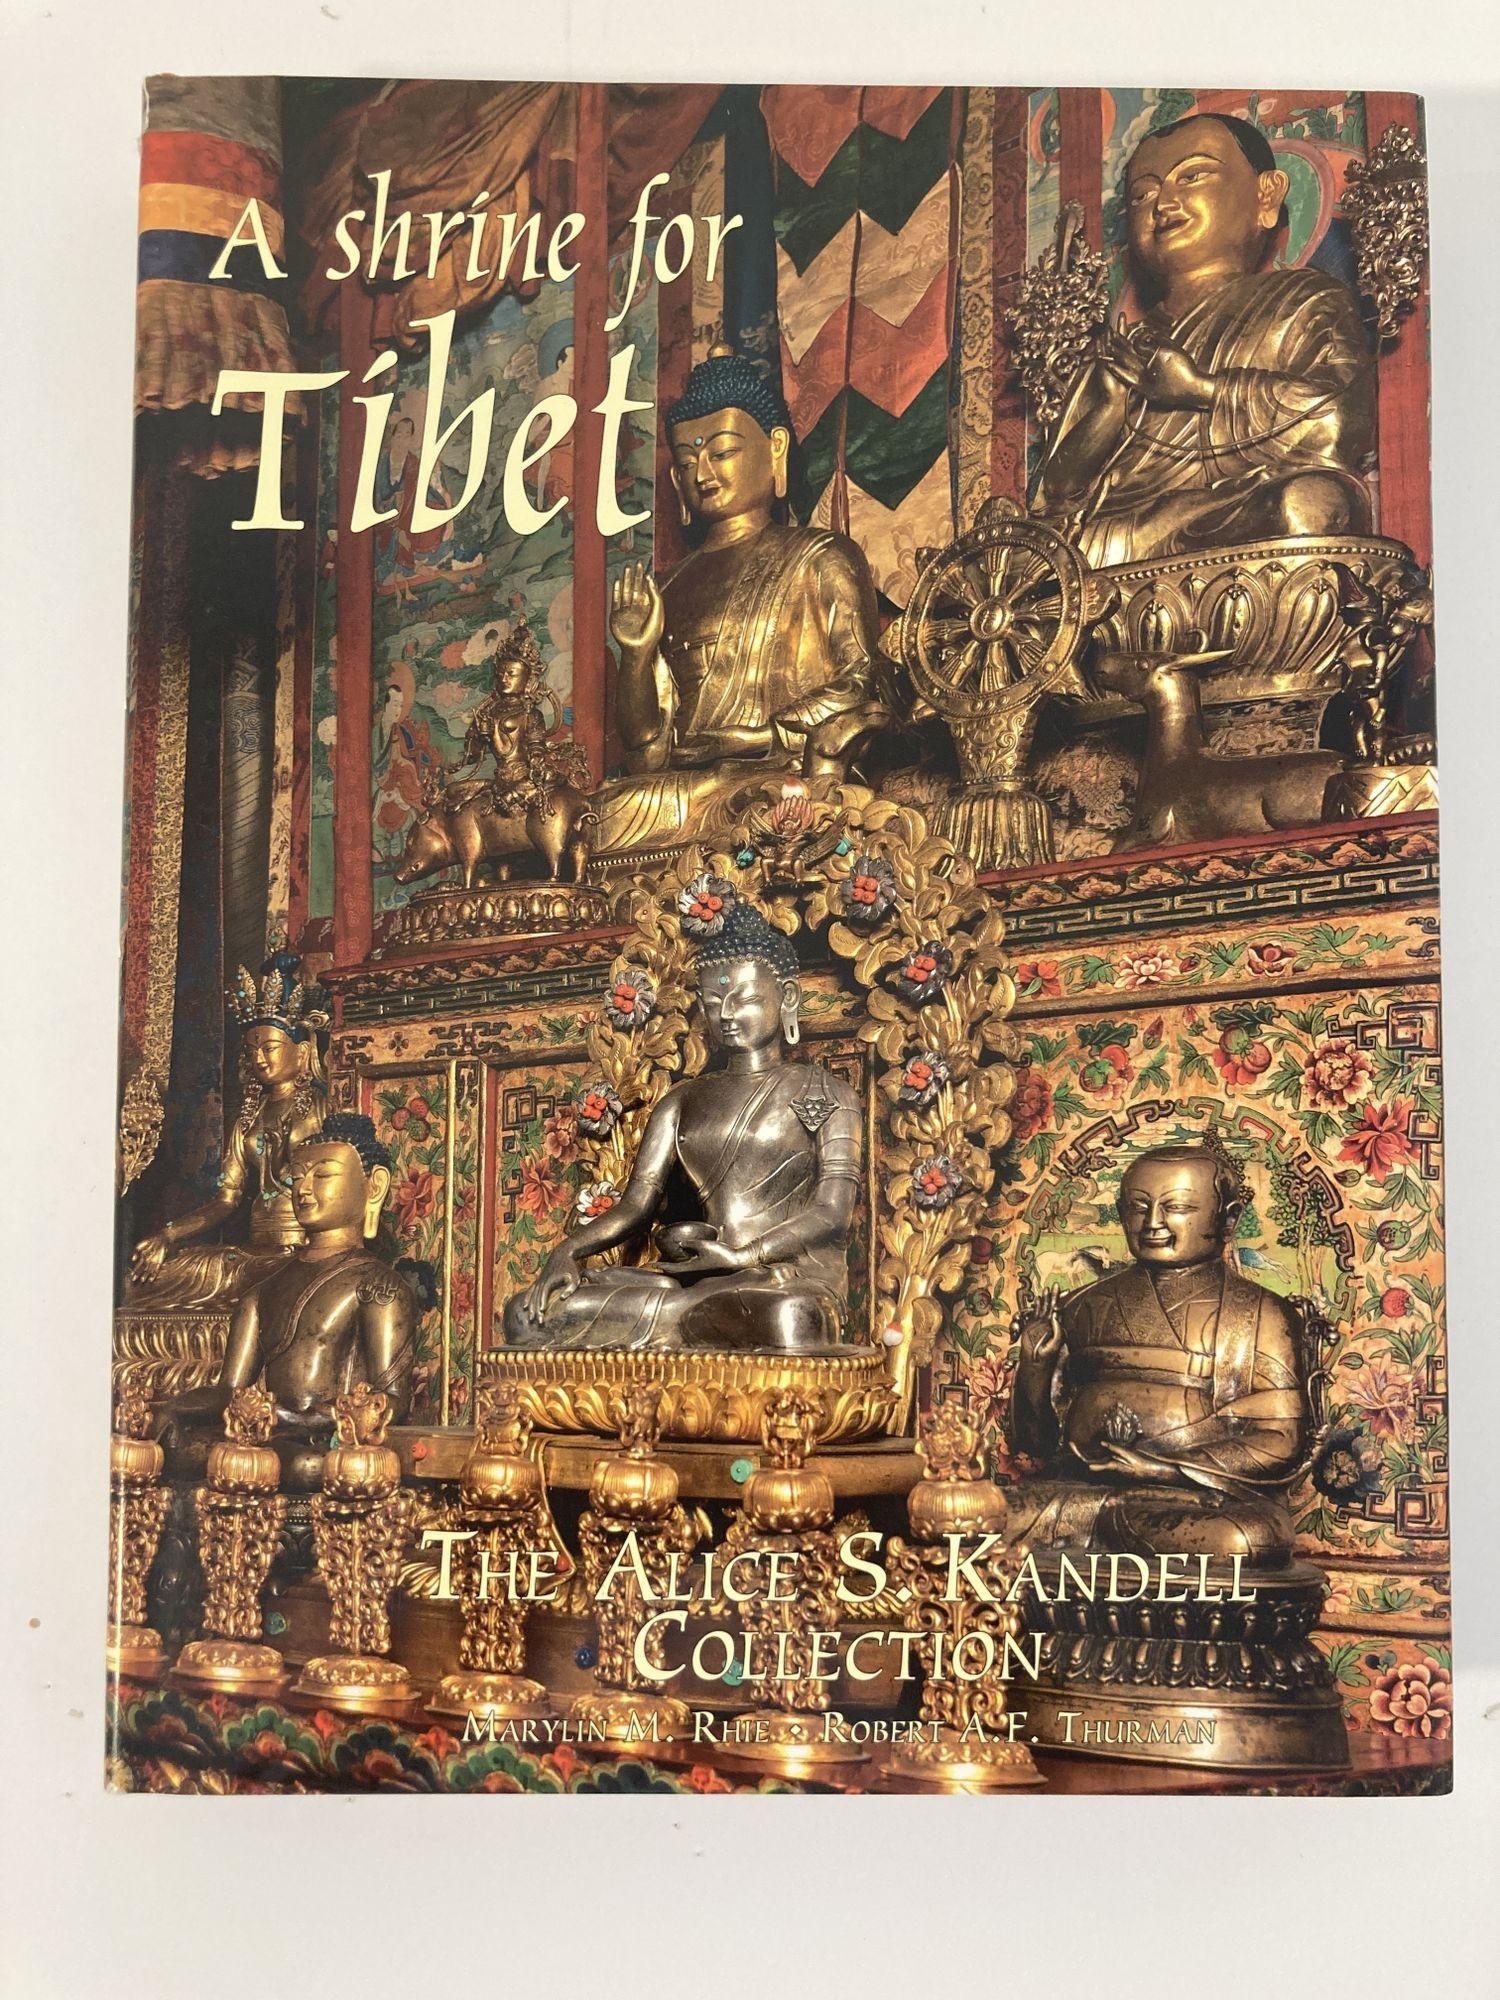 A Shrine for Tibet: The Alice S. Kandell Collection.
Collection of Tibetan Sacred Art Marylin Rhie, Robert Thurman, John Bigelow Taylor (Photographer).
Marylin M. Rhie, Robert A. F. Thurman Tibet House US, 2009 - Art - 299 pages.
Color